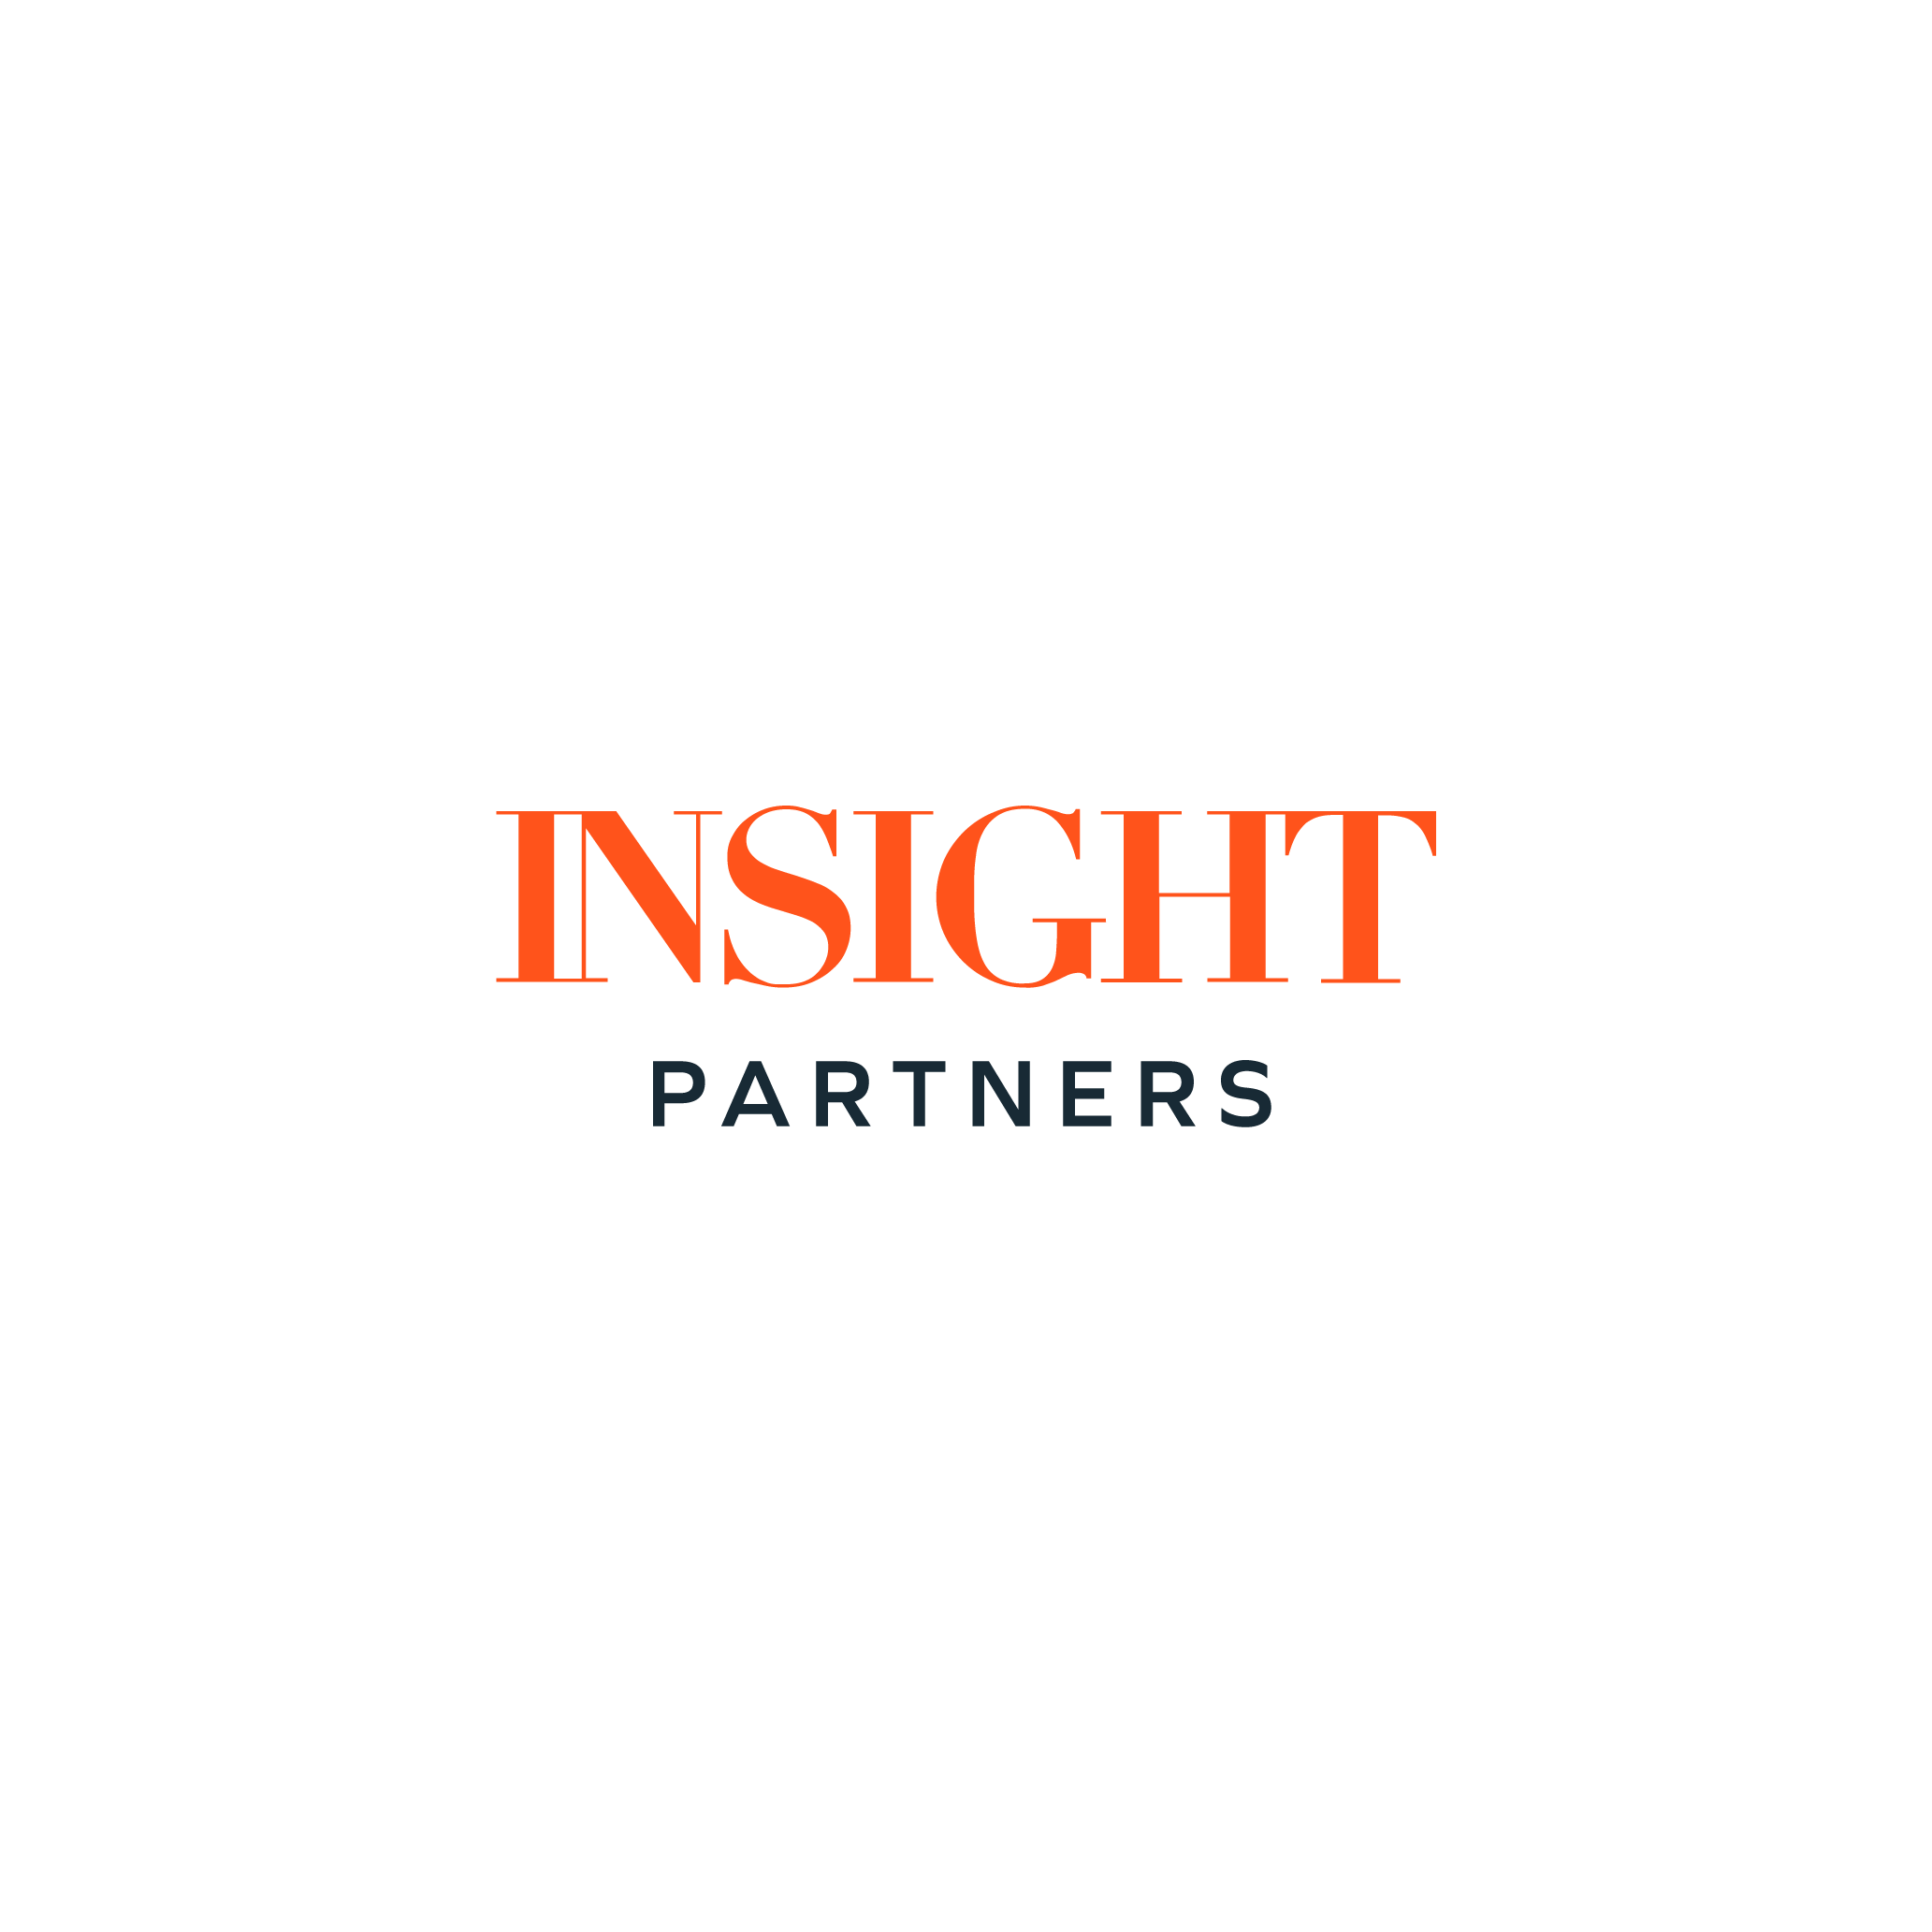 commercetools About Us Investor Relations INSIGHT PARTNERS